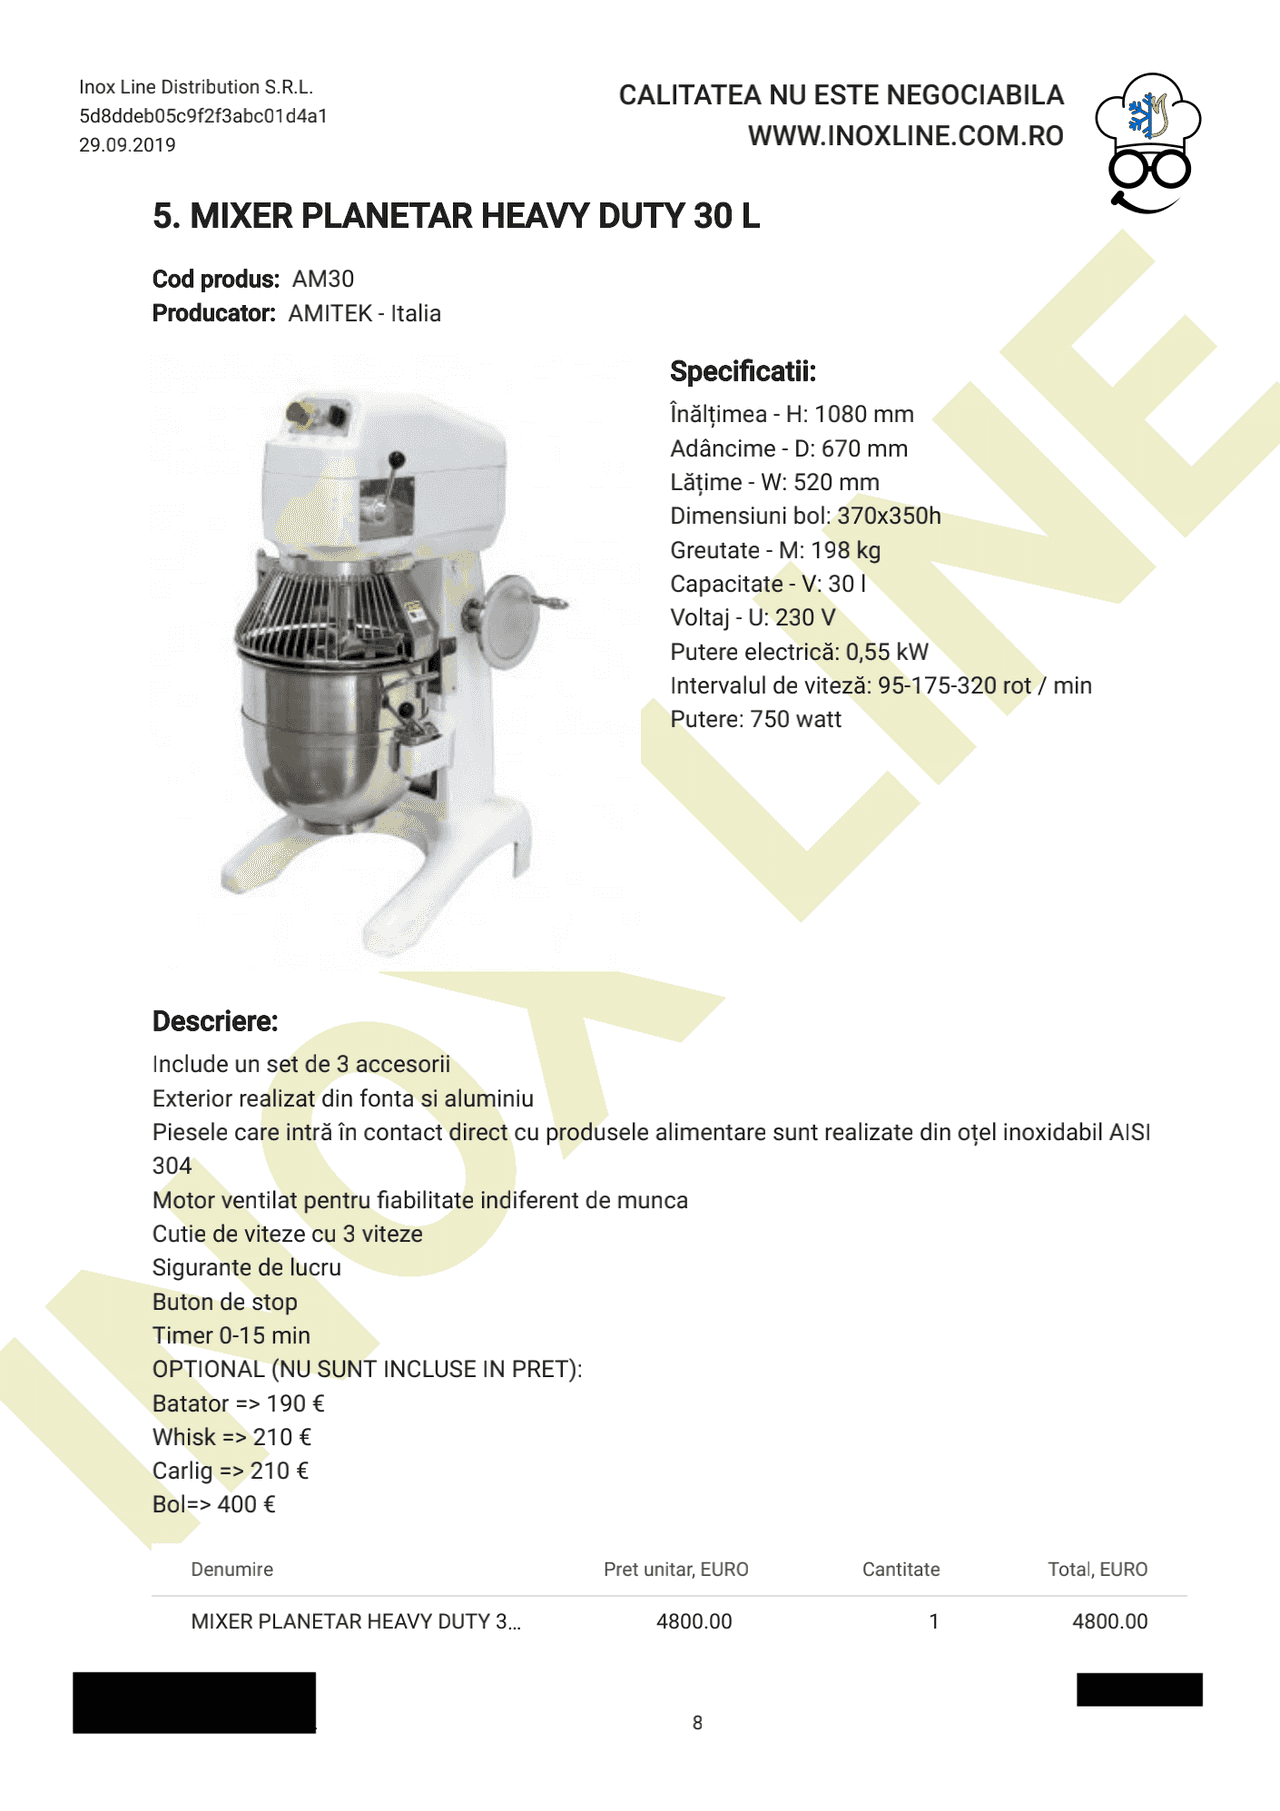 Inox Line offer version 2019 - Product page